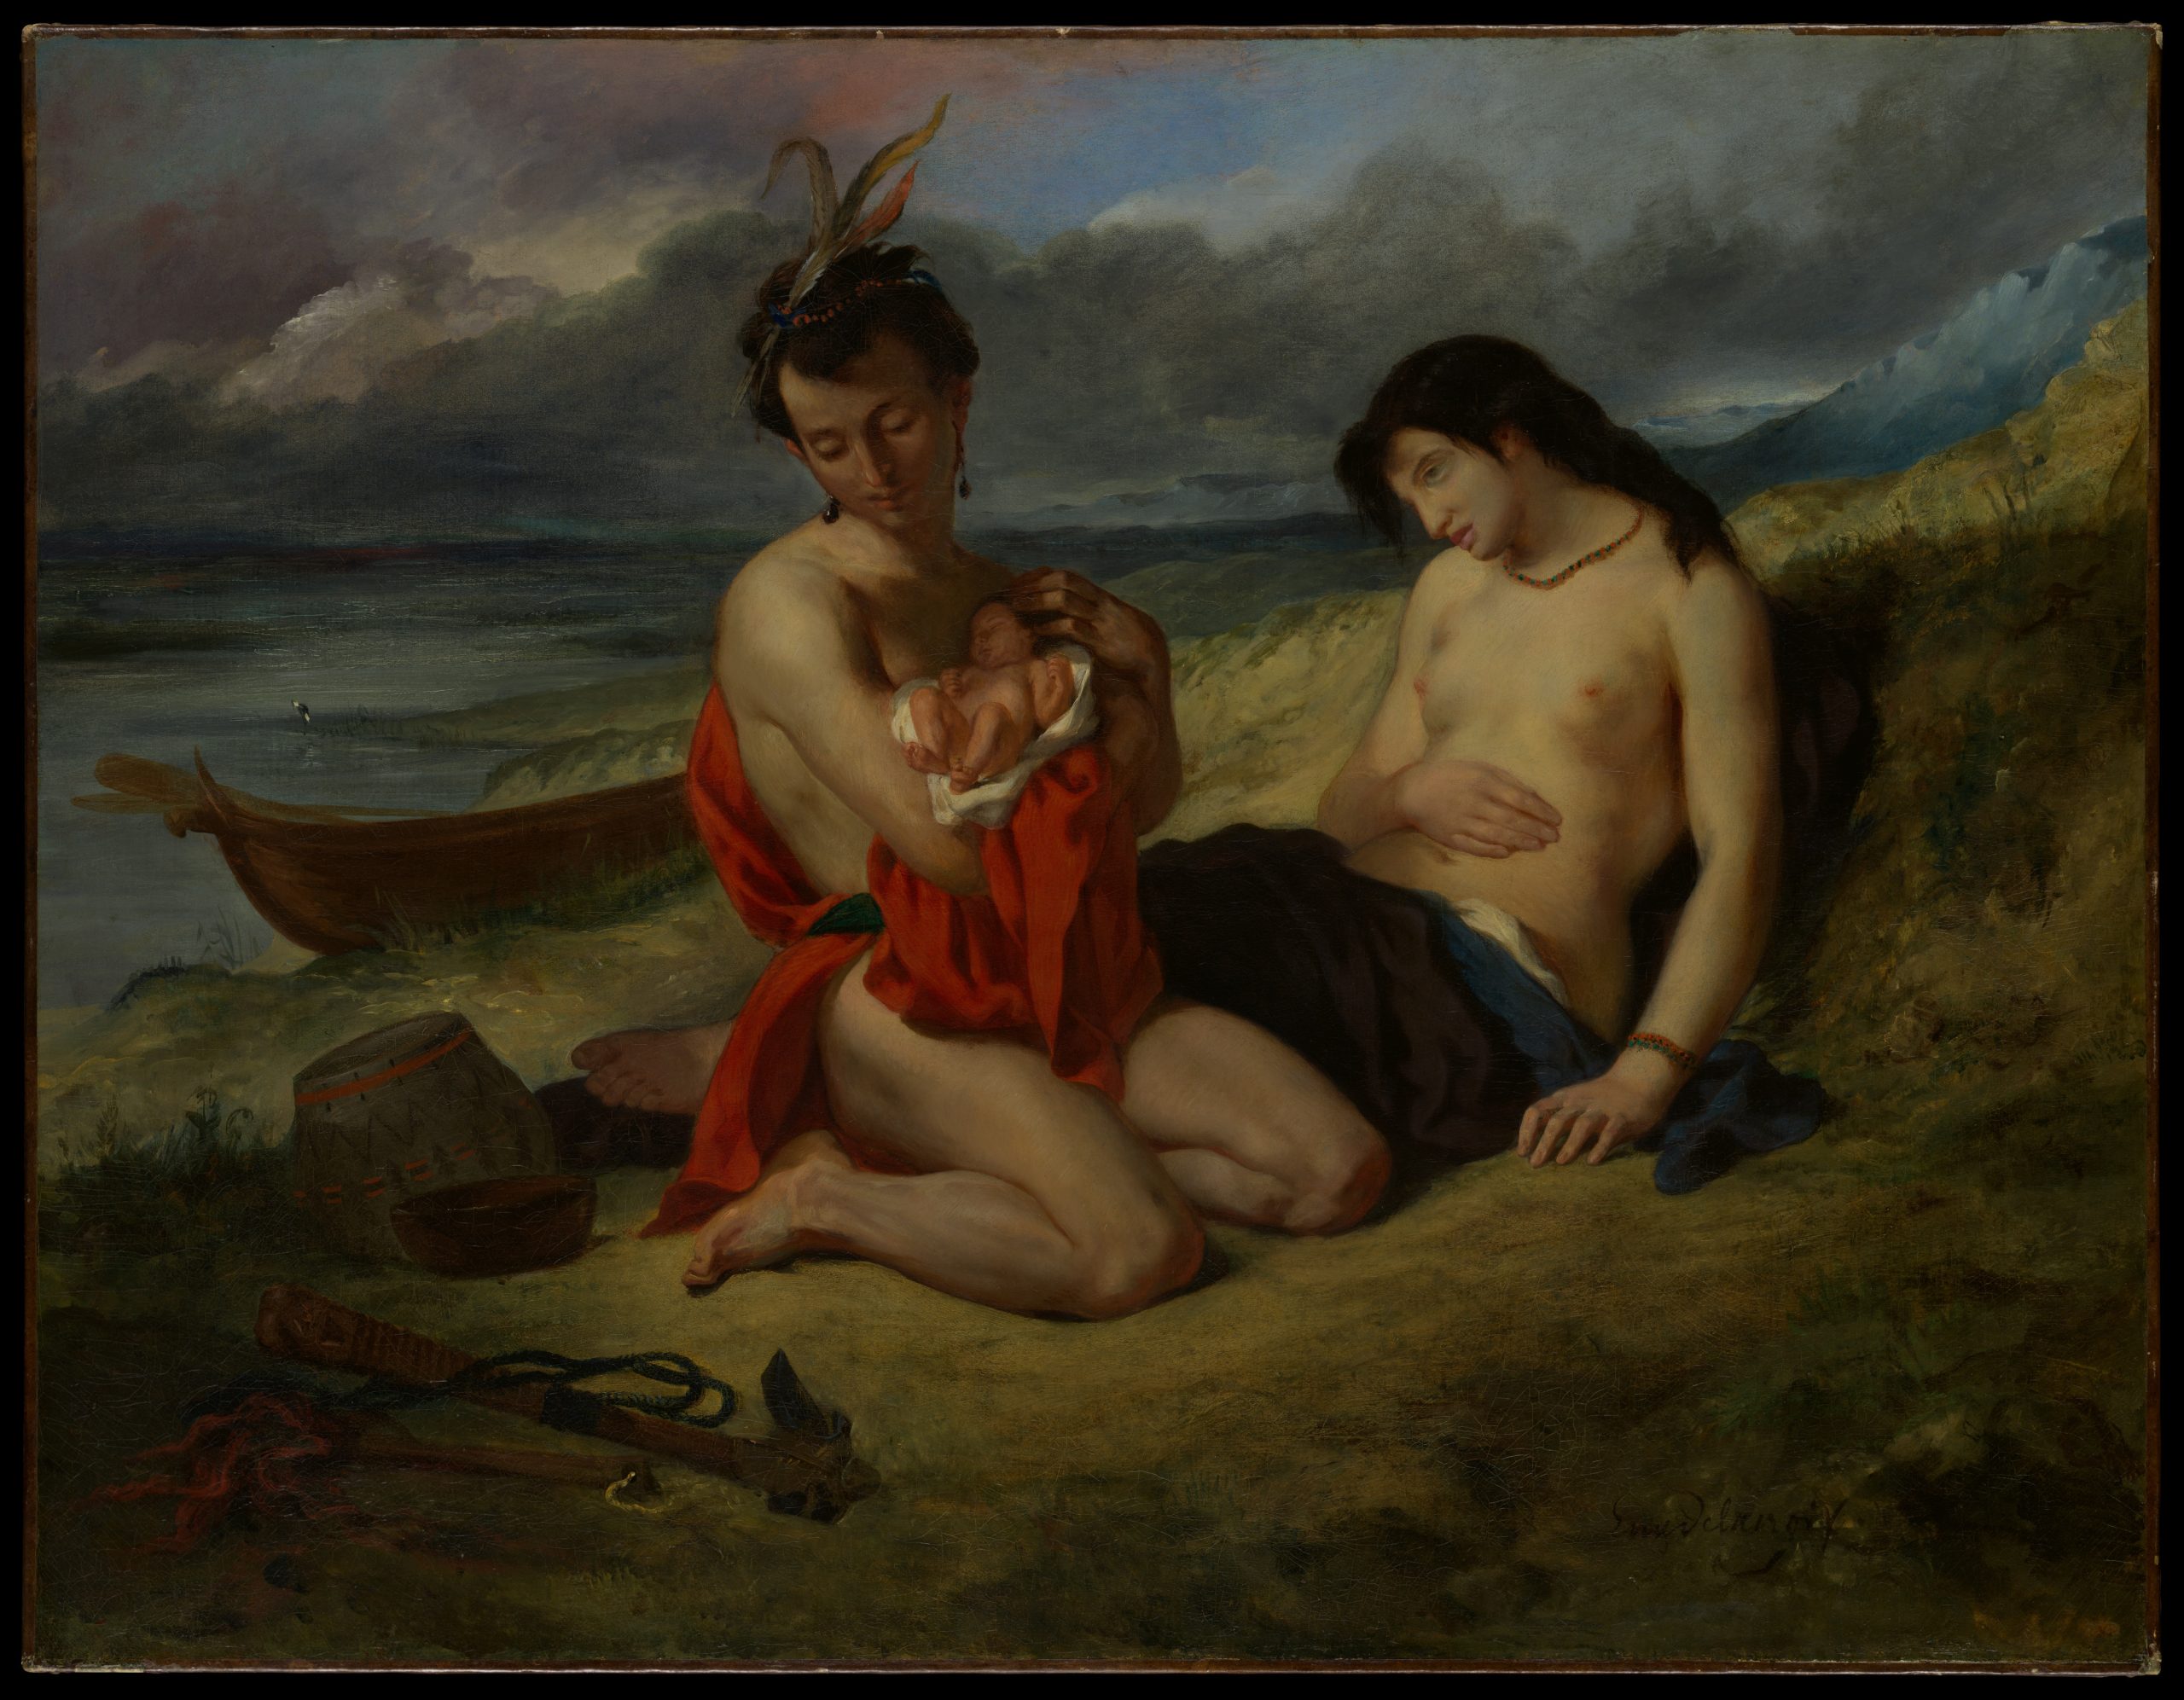 A family of three rest on the shore of a dark seaside next to a boat.